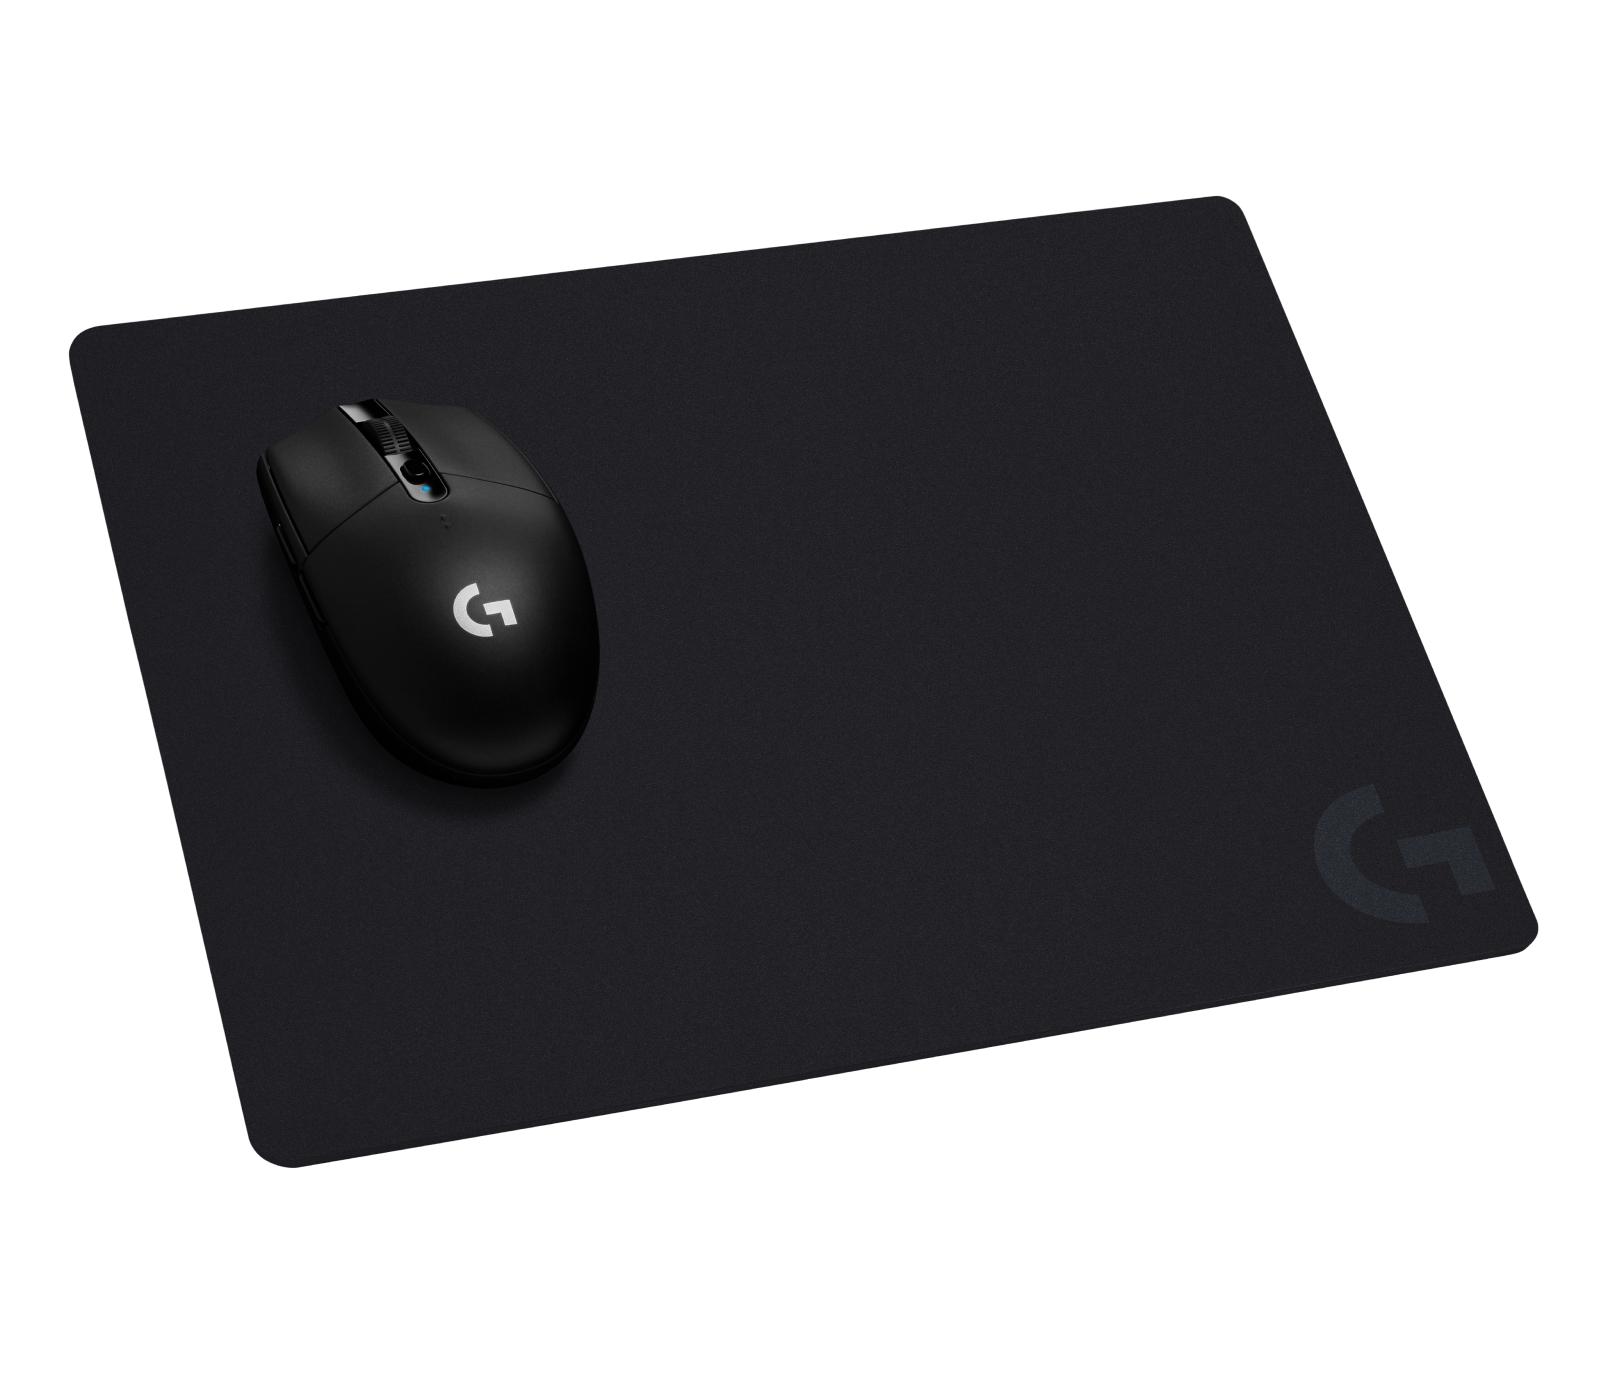 Current owner sphere Gaming Mouse Pad - Hard Surface - G440 - Logitech